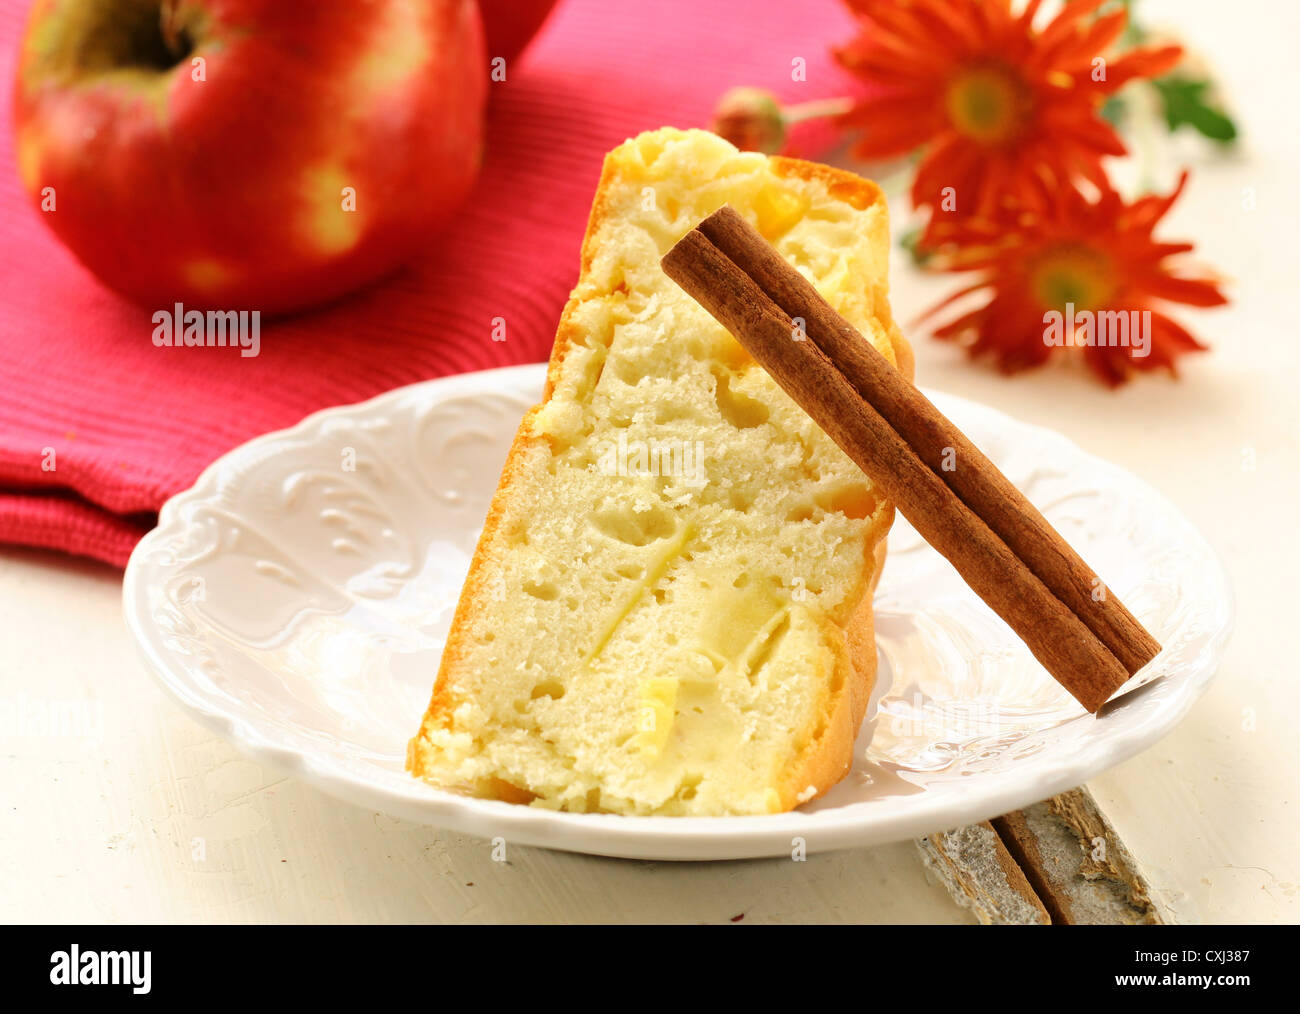 apple pie with cinnamon stick on a white plate Stock Photo